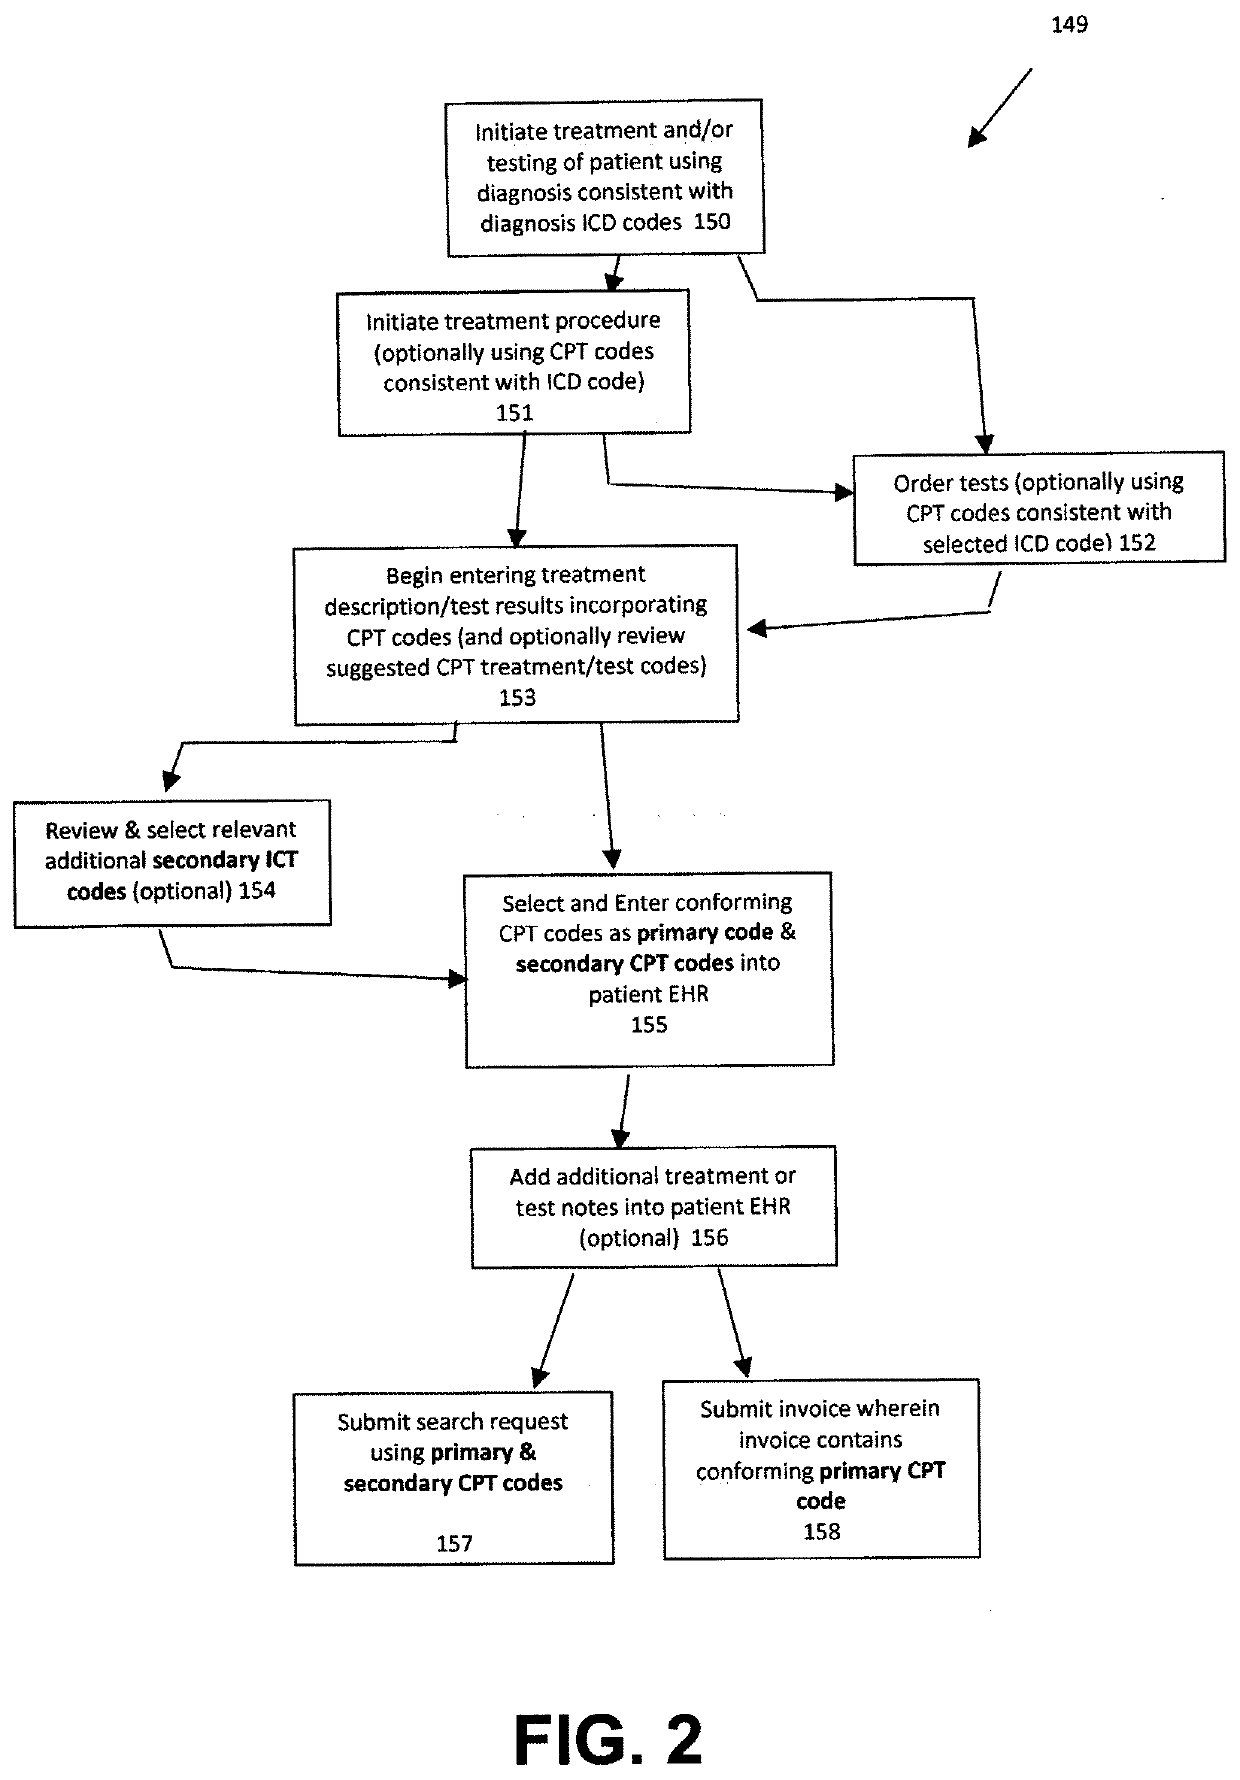 Diagnositic and treatmetnt tool and method for electronic recording and indexing patient encounters for allowing instant search of patient history